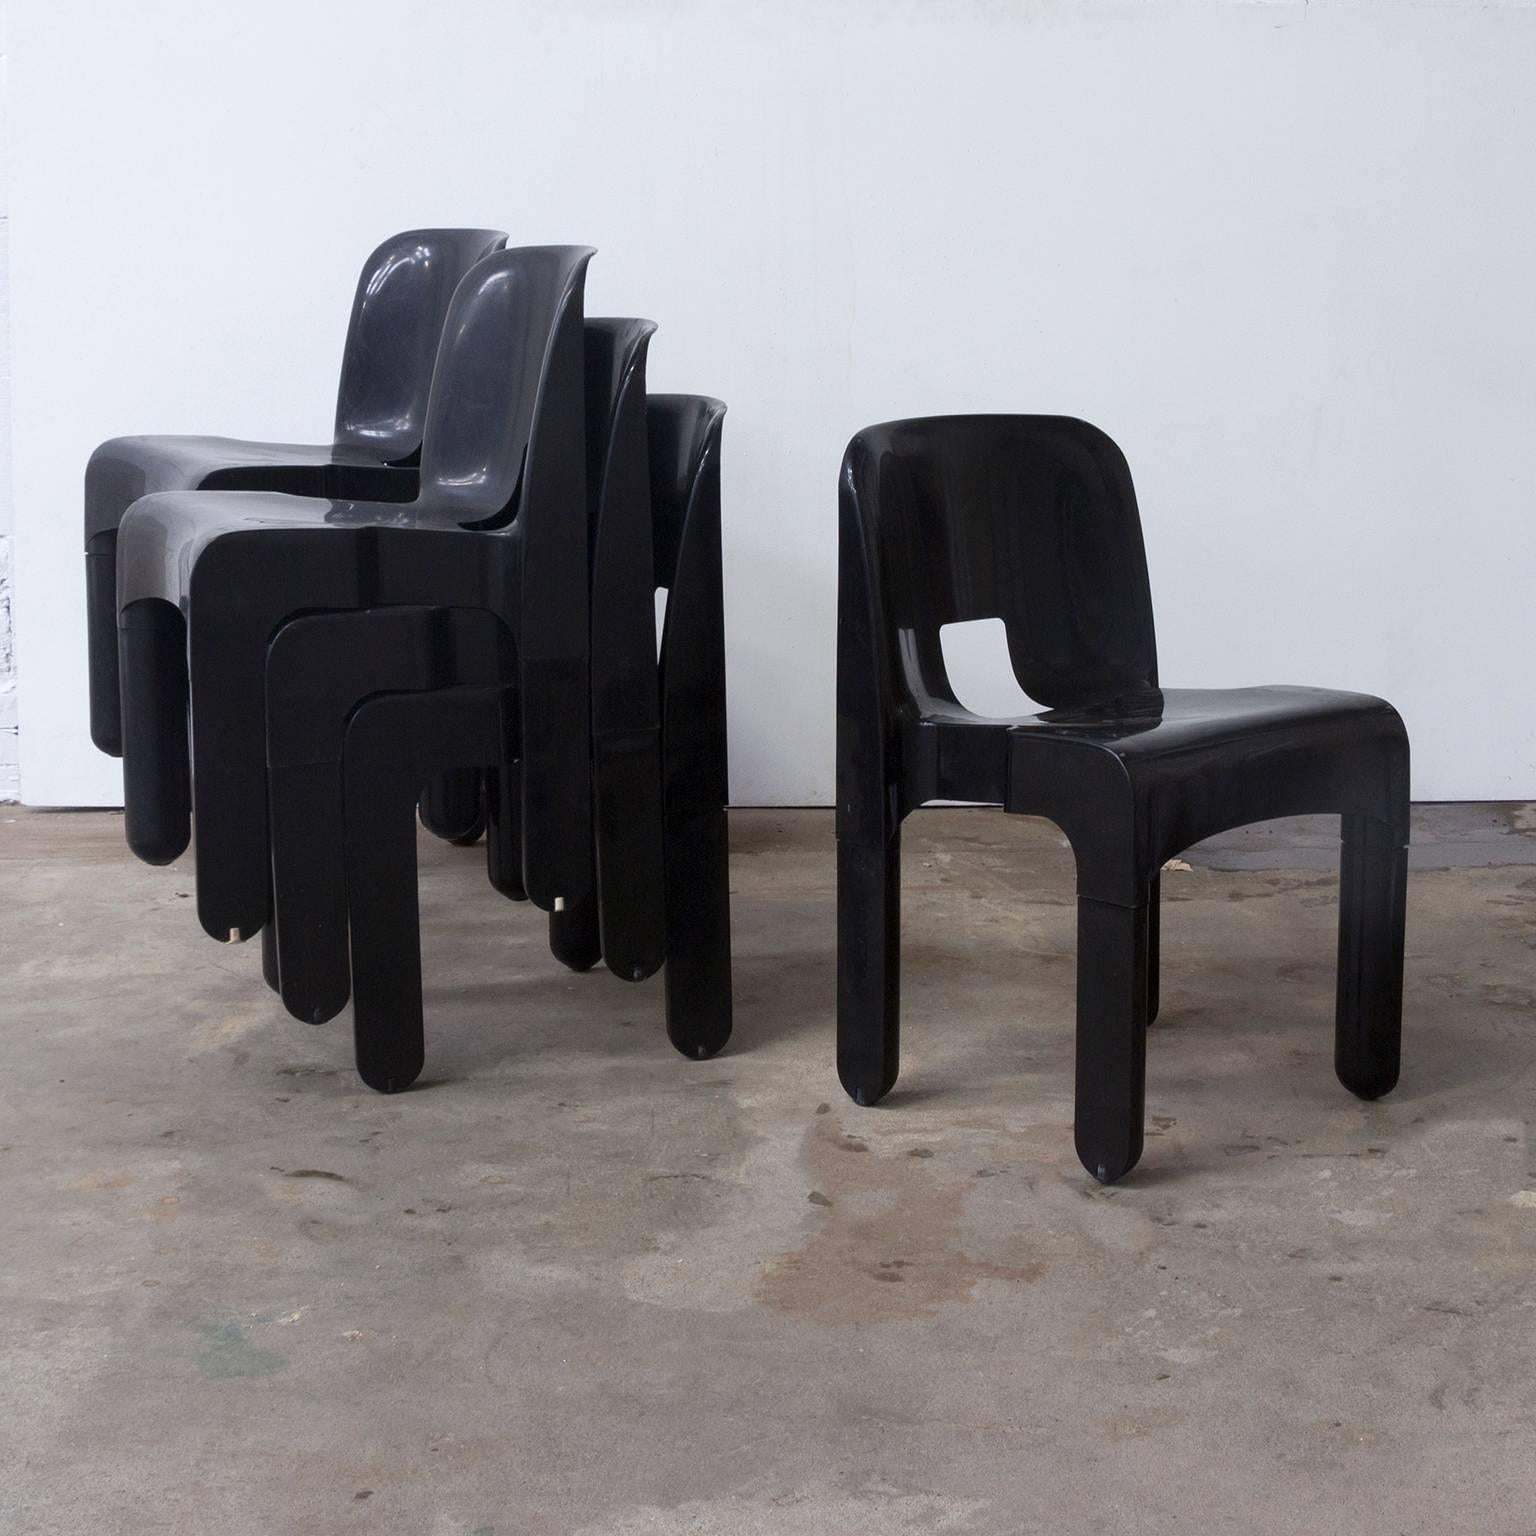 Three Kartel plastic chairs in black. Traces of wear like scratches (see picture #8). One of the plastic legs will fall off when the chair when you lift the chair, but can still be used for sitting and one of the legs has a crack on top, but can